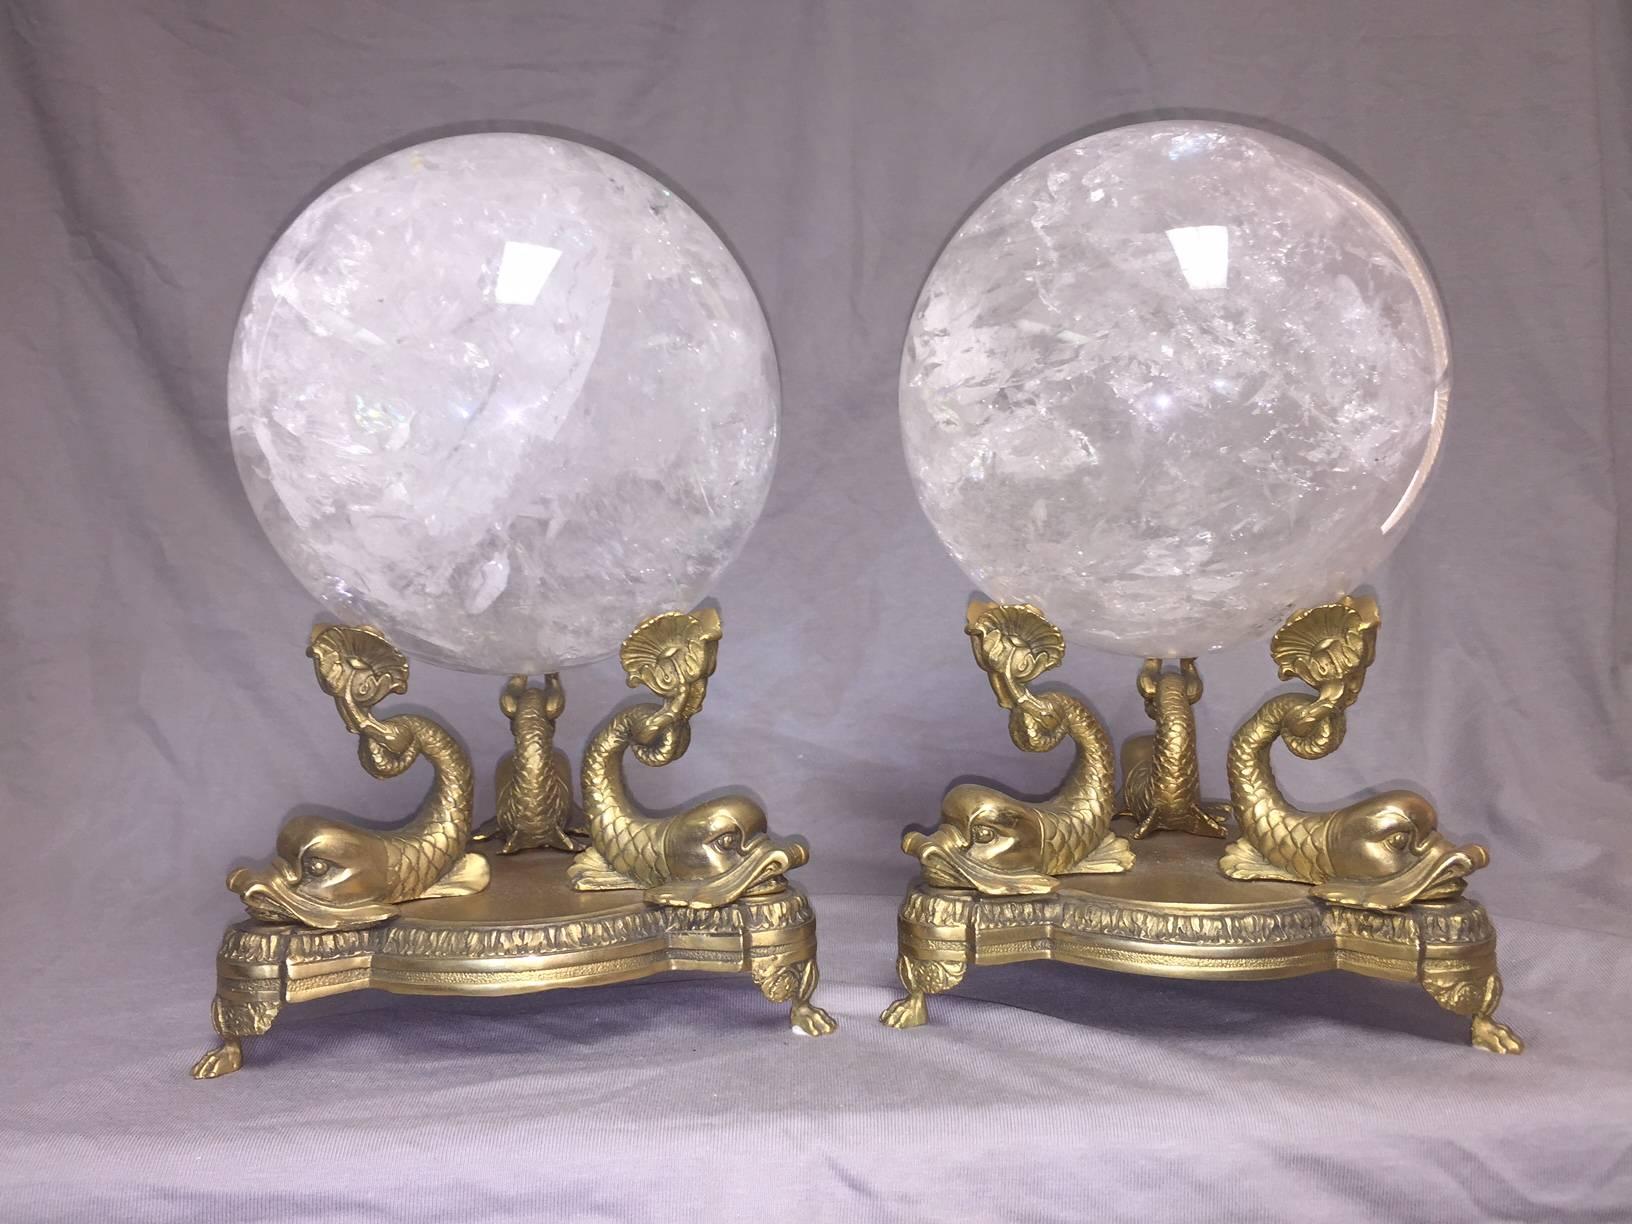 Impressive pair of hand-carved and hand polished rock crystal spheres on bronze dolphin bases, second half of 20th century.

The diameter of the rock crystal sphere is 7.5 inches.
The overall height is listed below.

Rock crystal (crystal